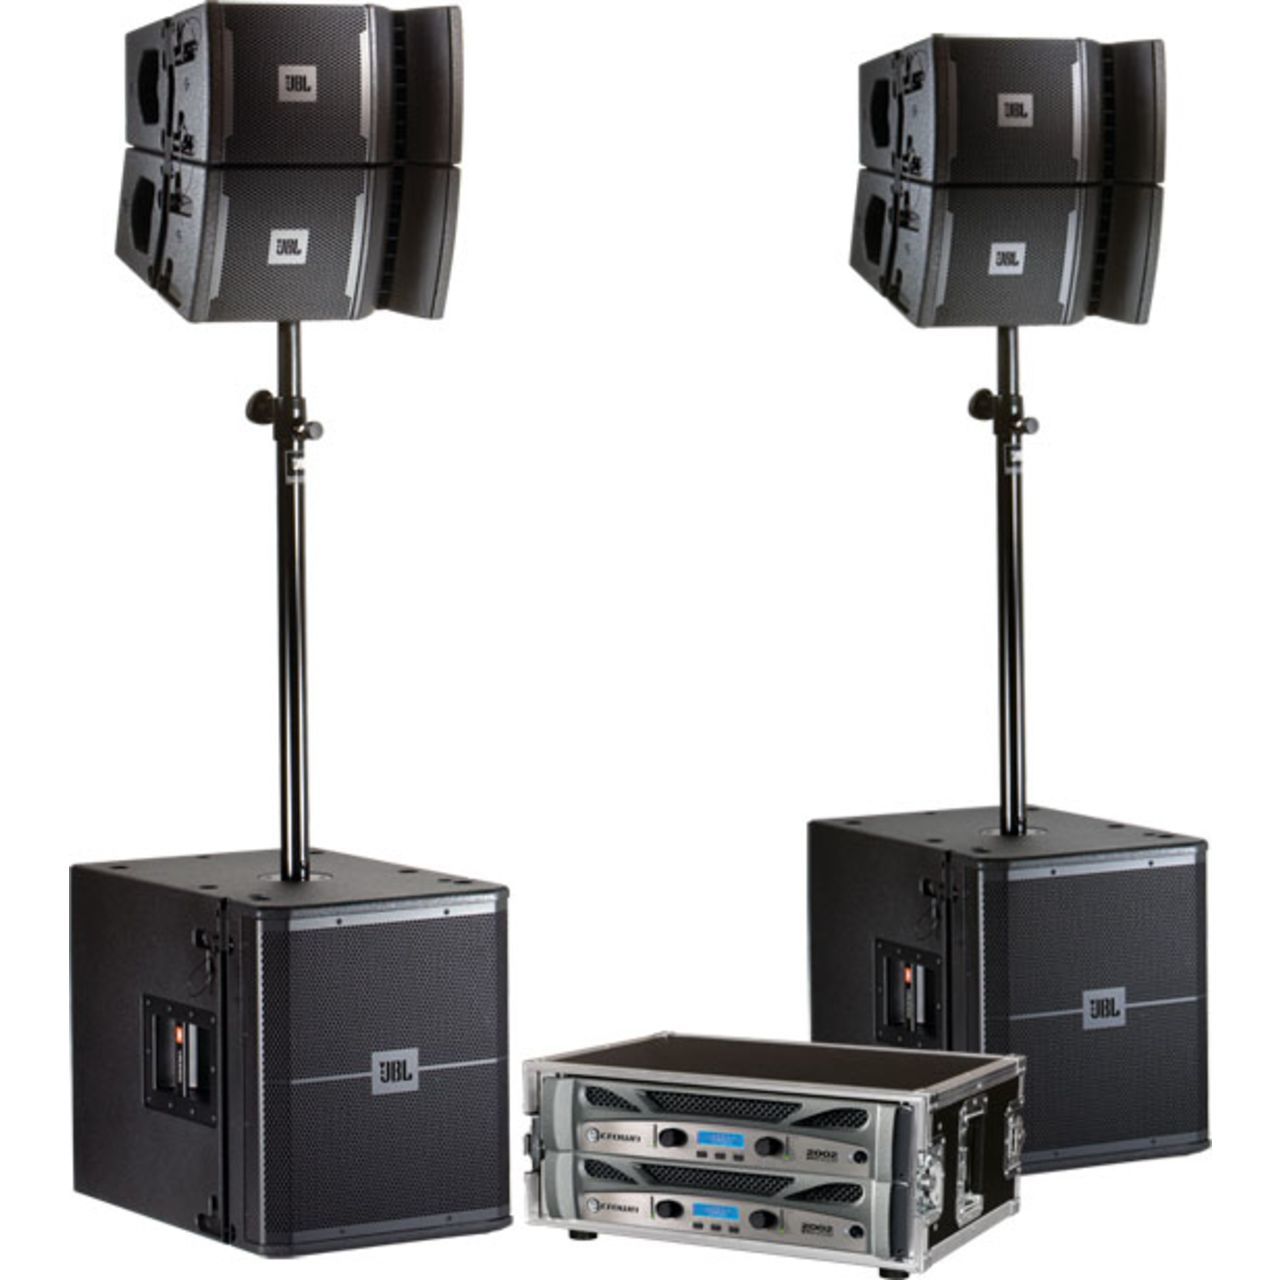 High Quality JBL VRX Line Array Speakers Available For a Superior Audio Experience.